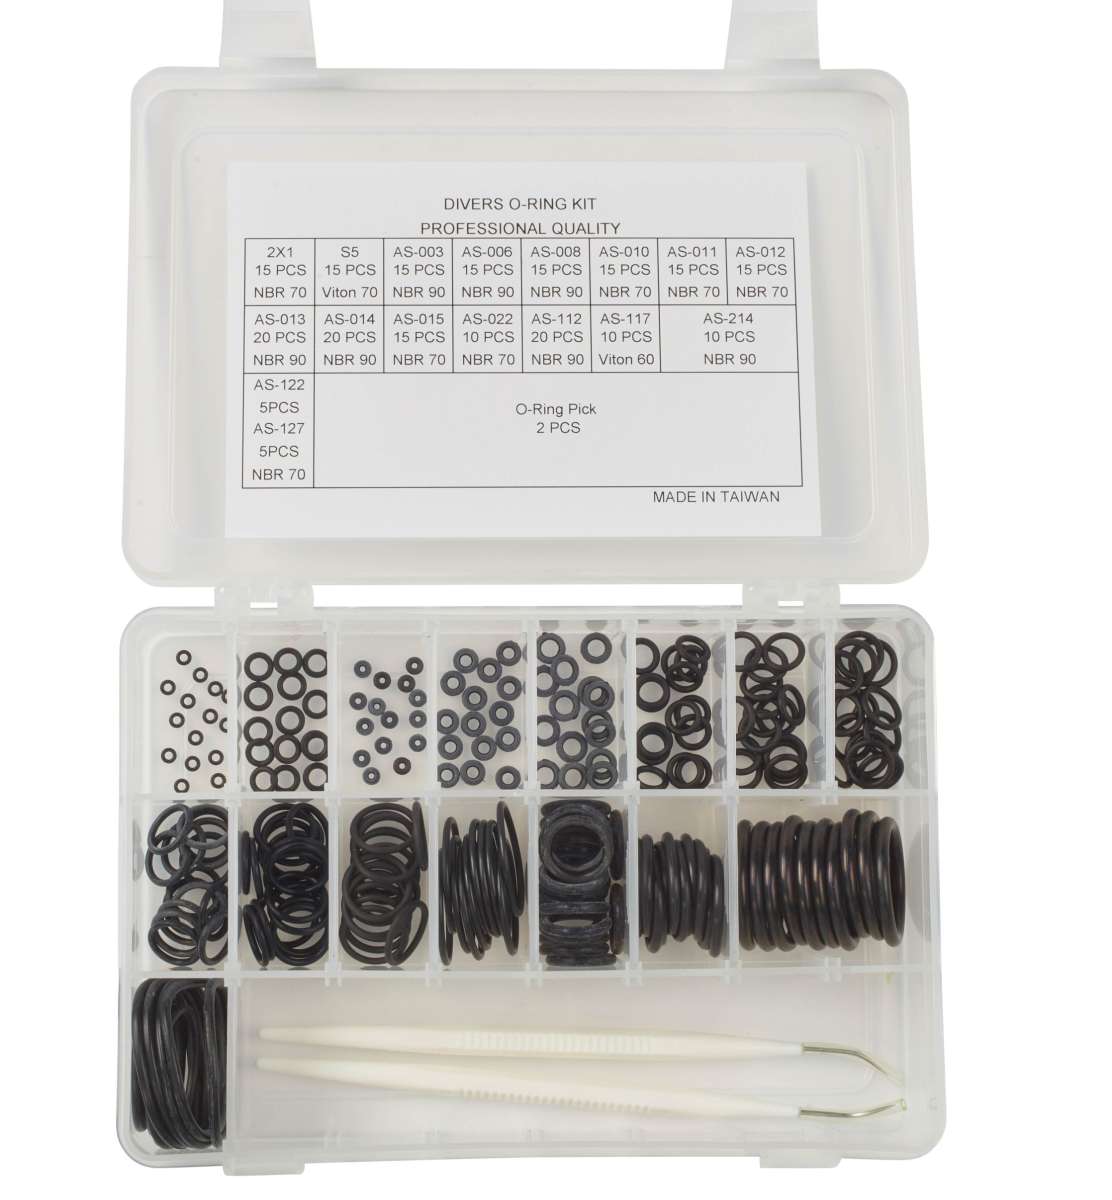 O-Ring Kit 1000 (18 different sizes of o-rings)